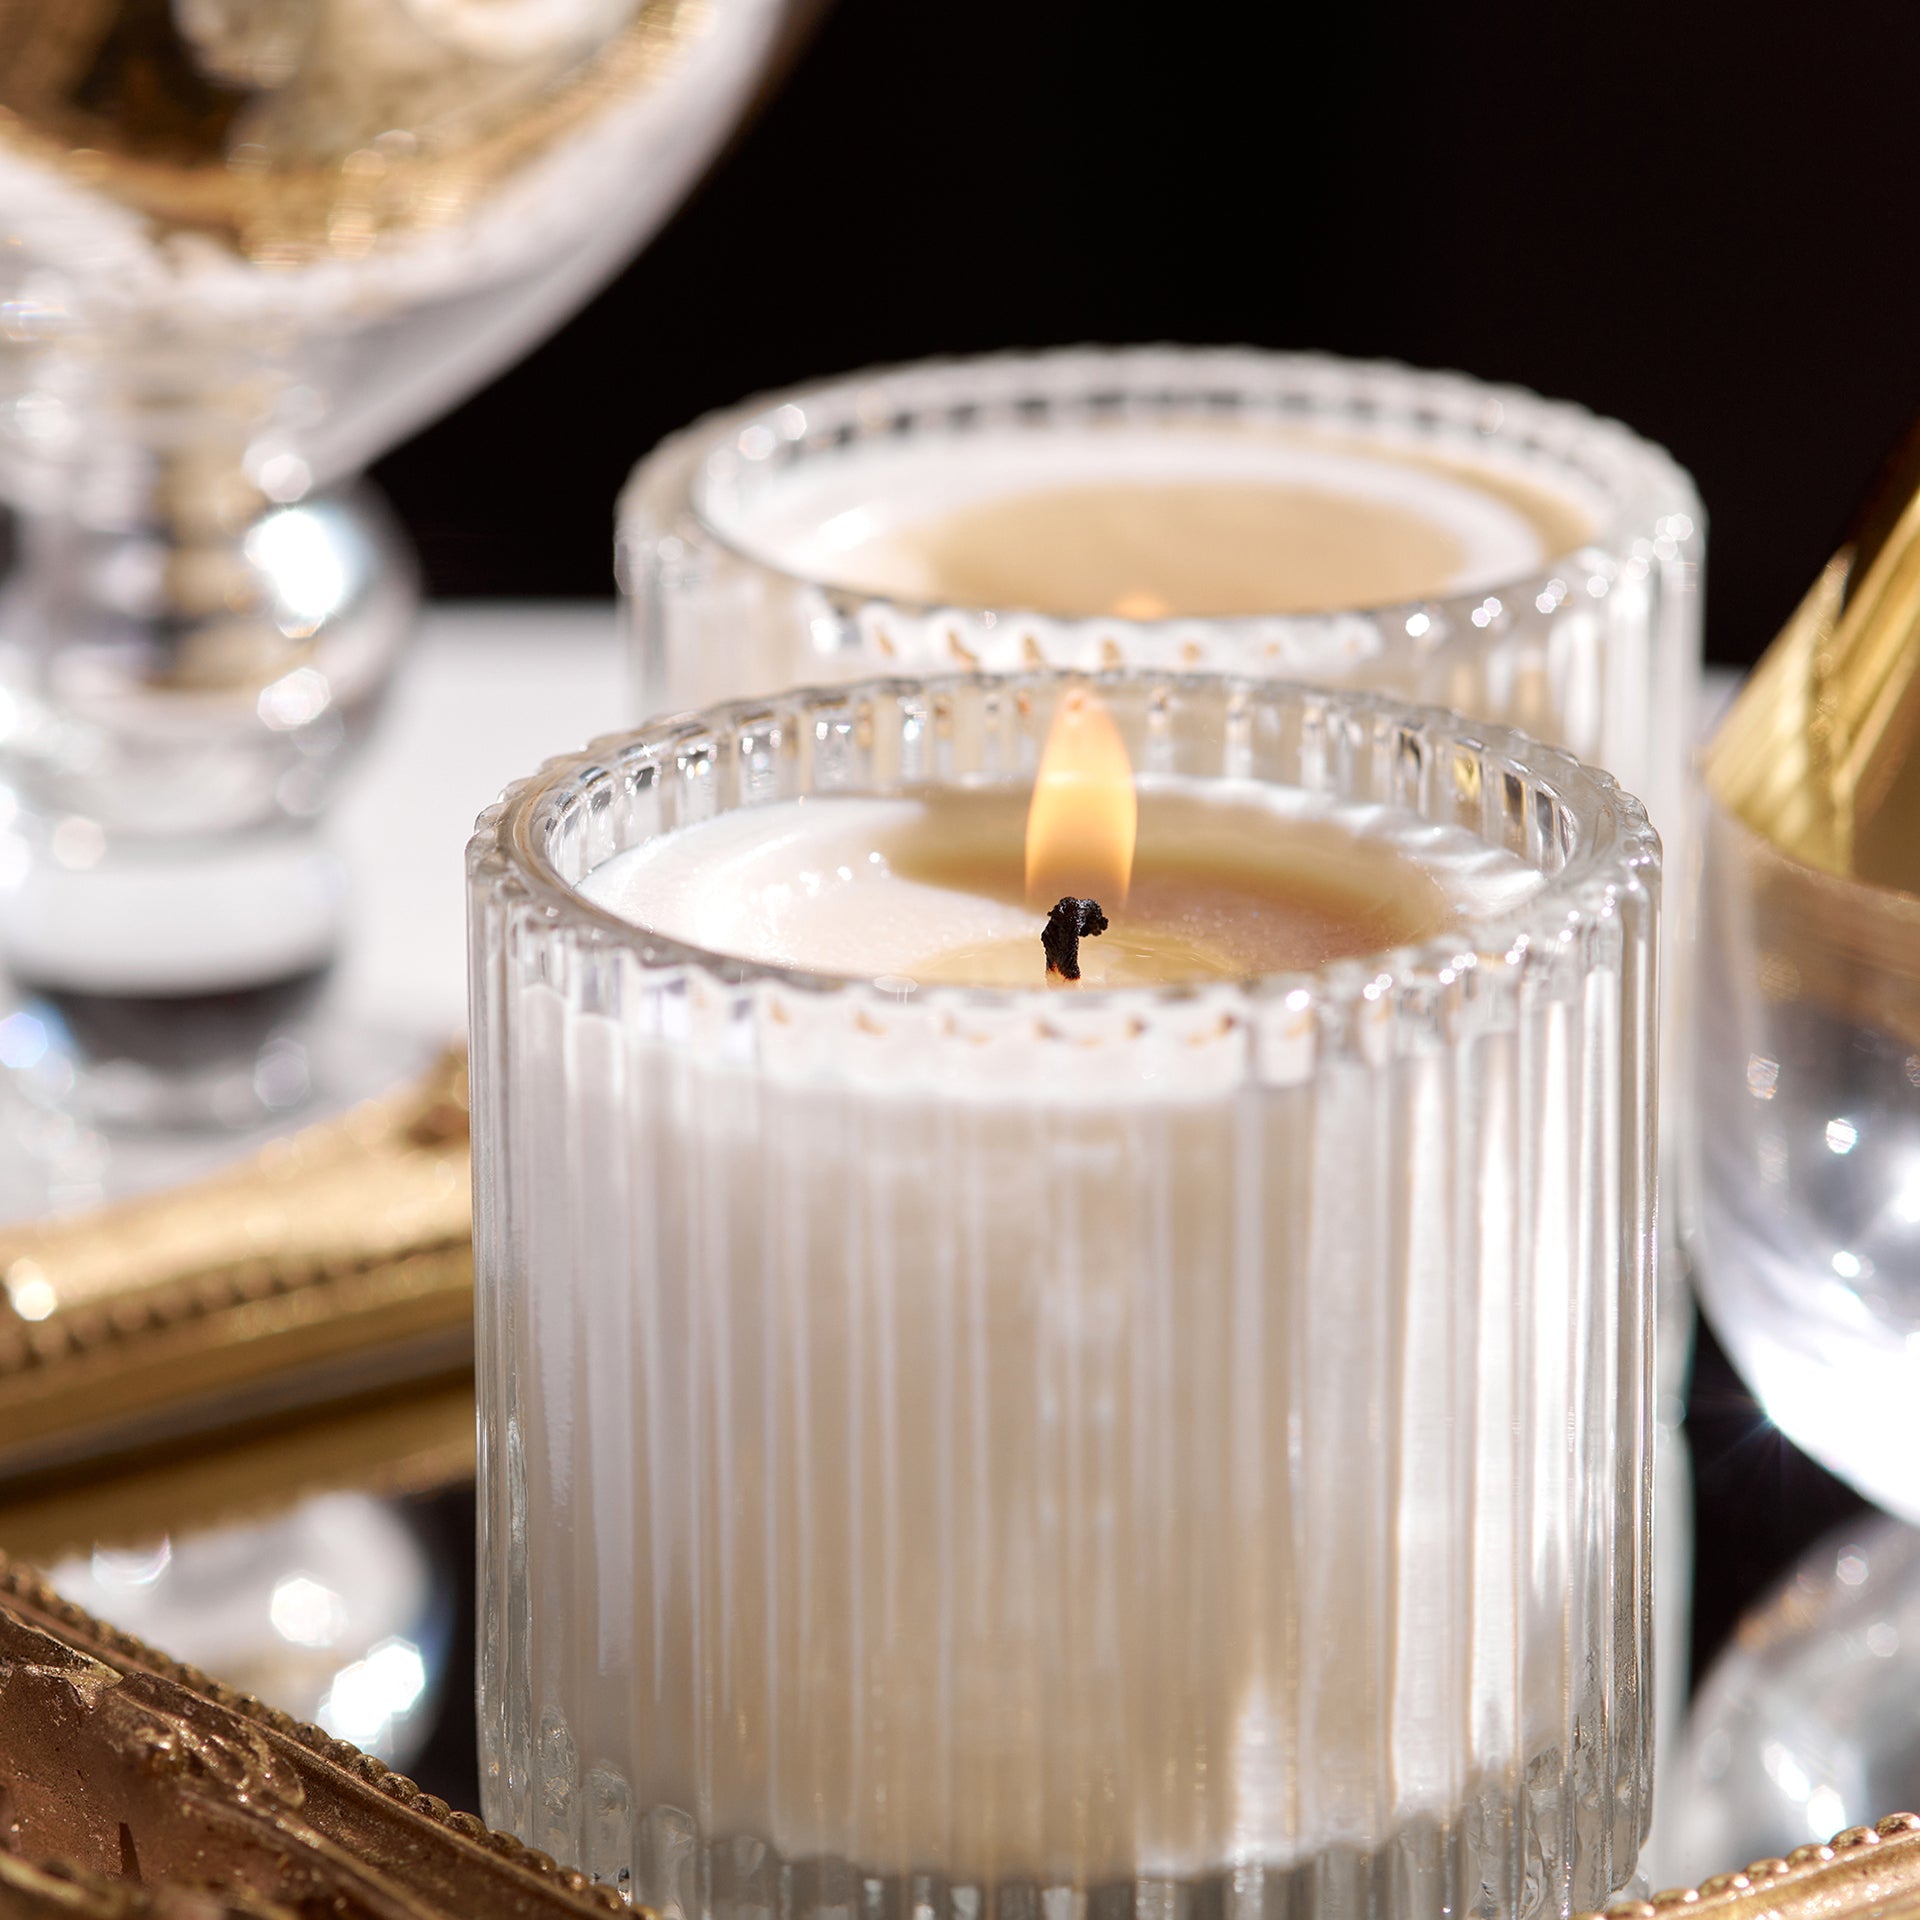 Scented Candle Longevity: Can Your Favorite Scents Really Vanish? - VAUCLUSE